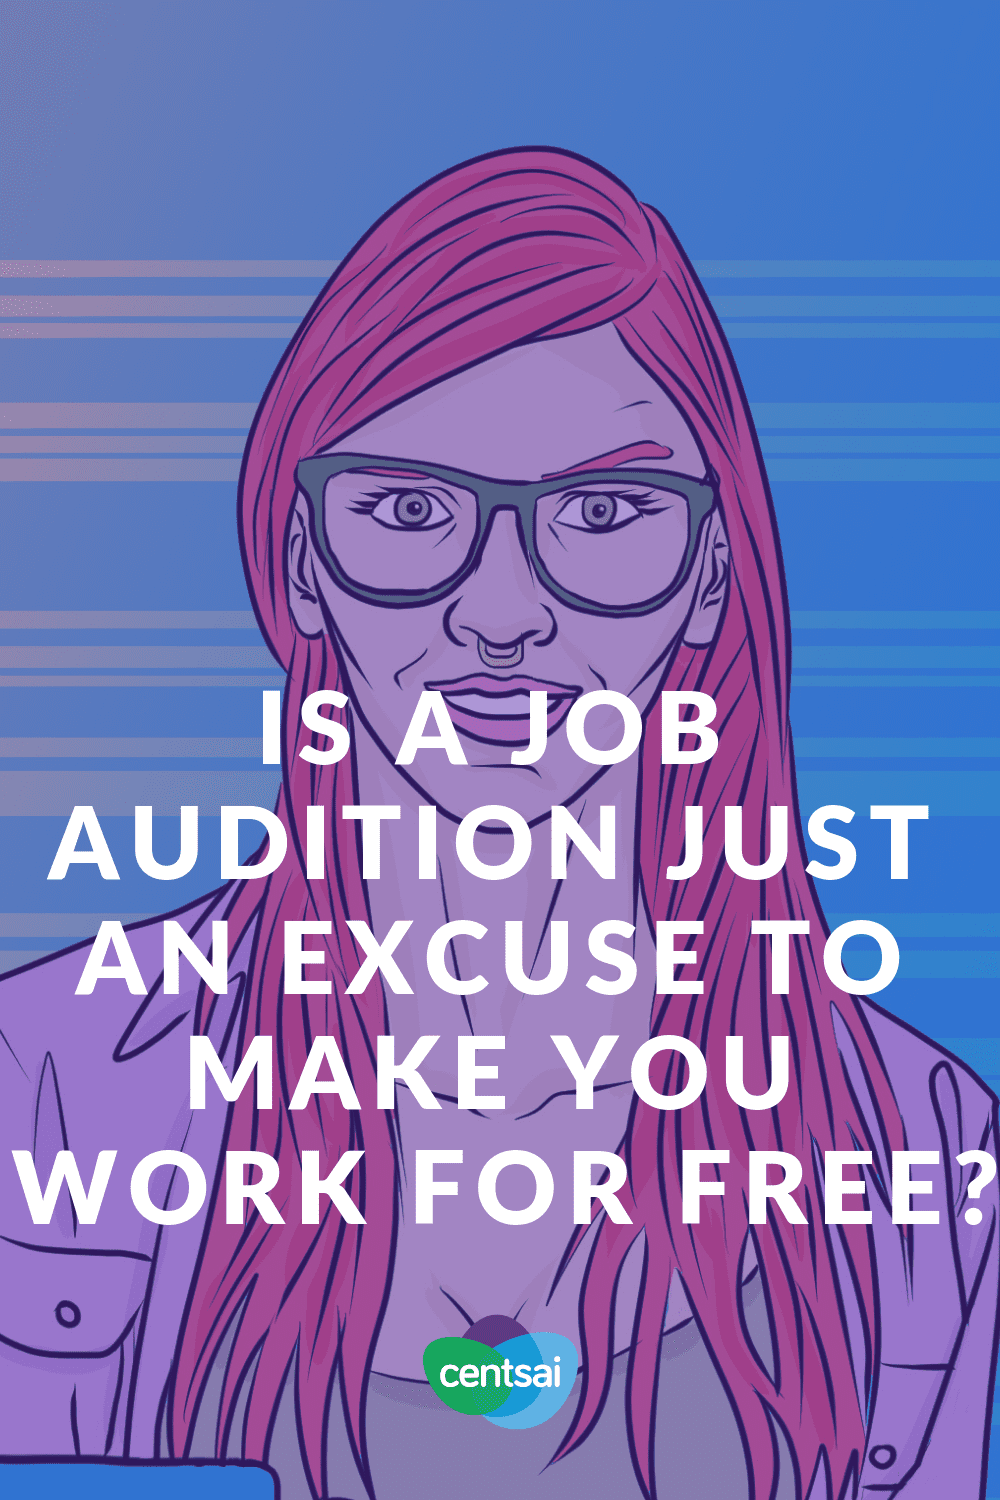 Is a Job Audition Just an Excuse To Make You Work For Free? You might have heard of an intensive form of job interview called a job audition. But what is a job audition, exactly? Read more to find out. #jobinterview #job